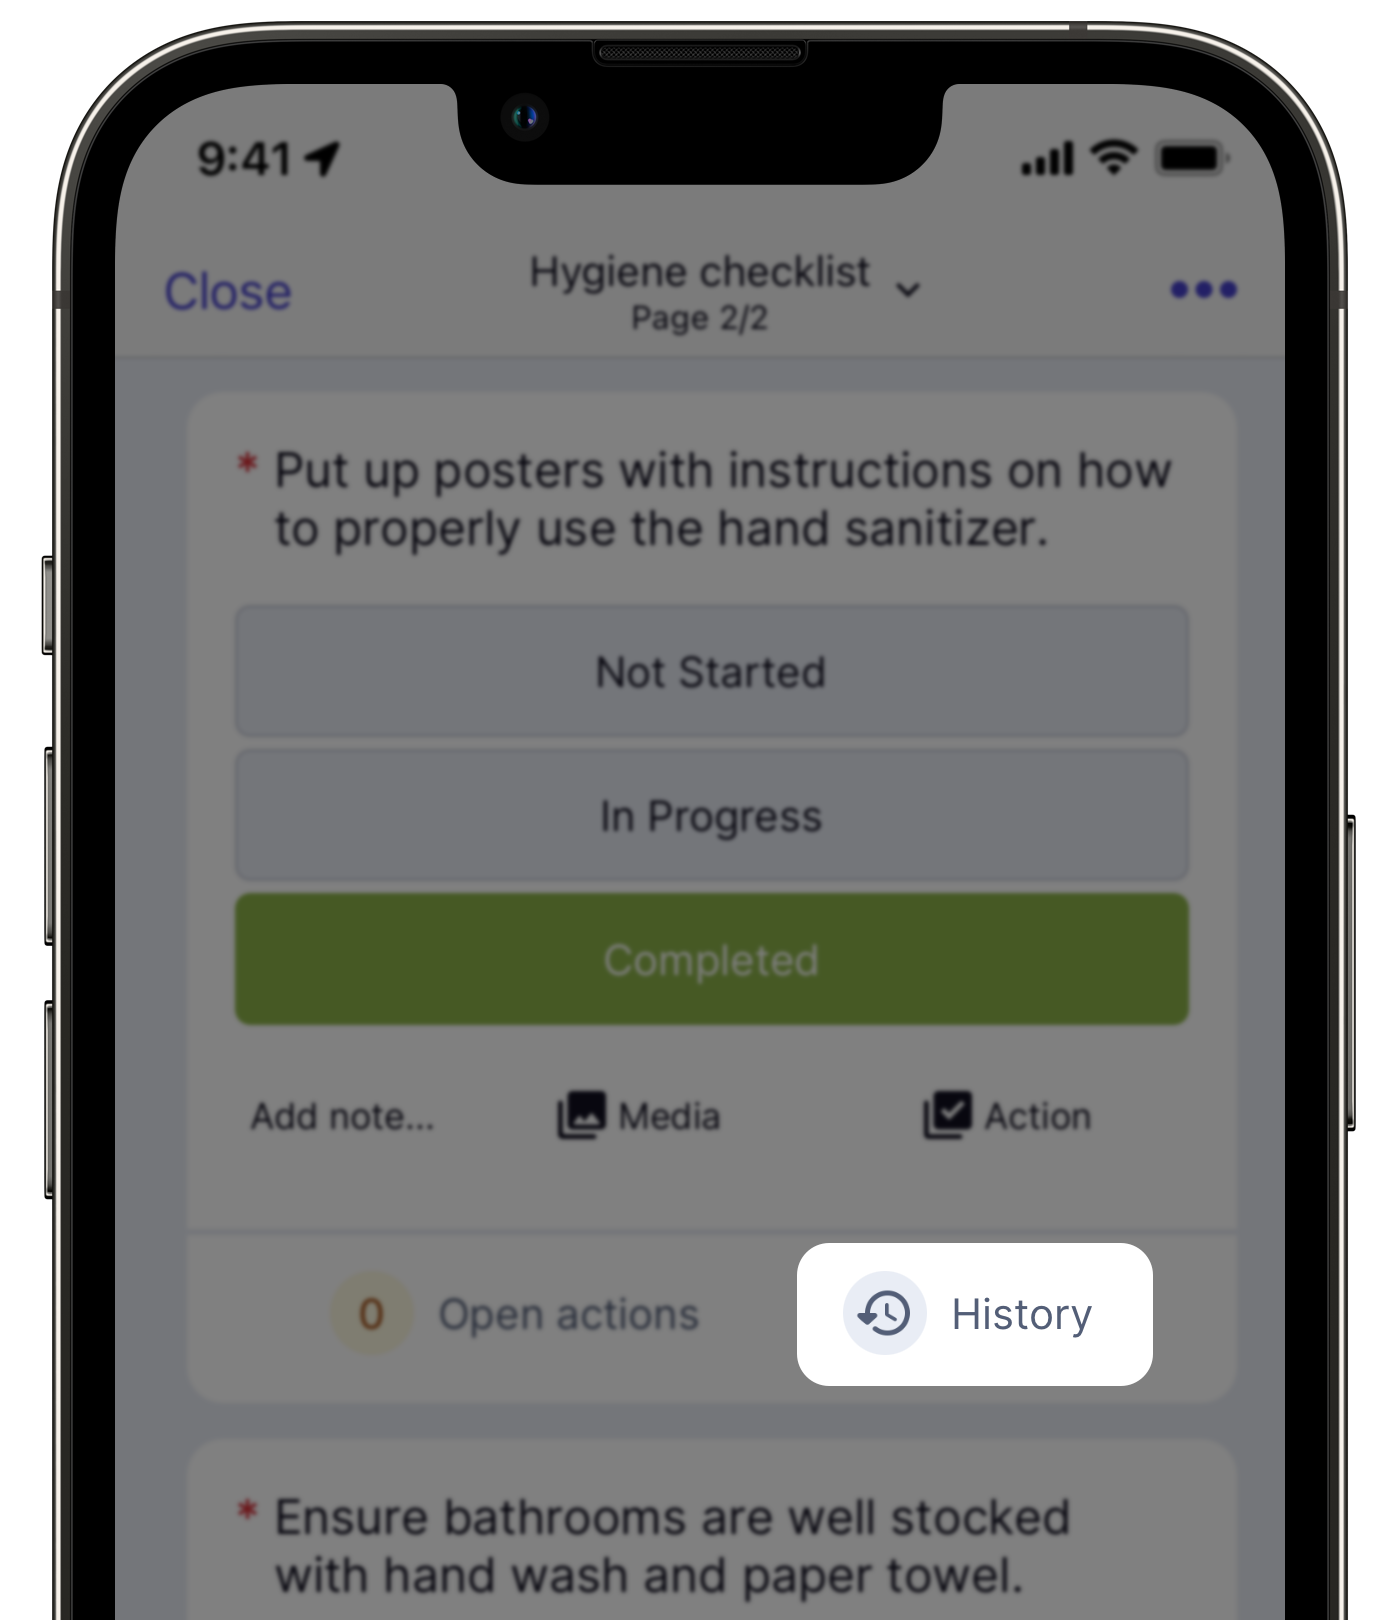 The "History" button in inspections where users can see historical multiple-choice responses via the mobile app on iOS devices.